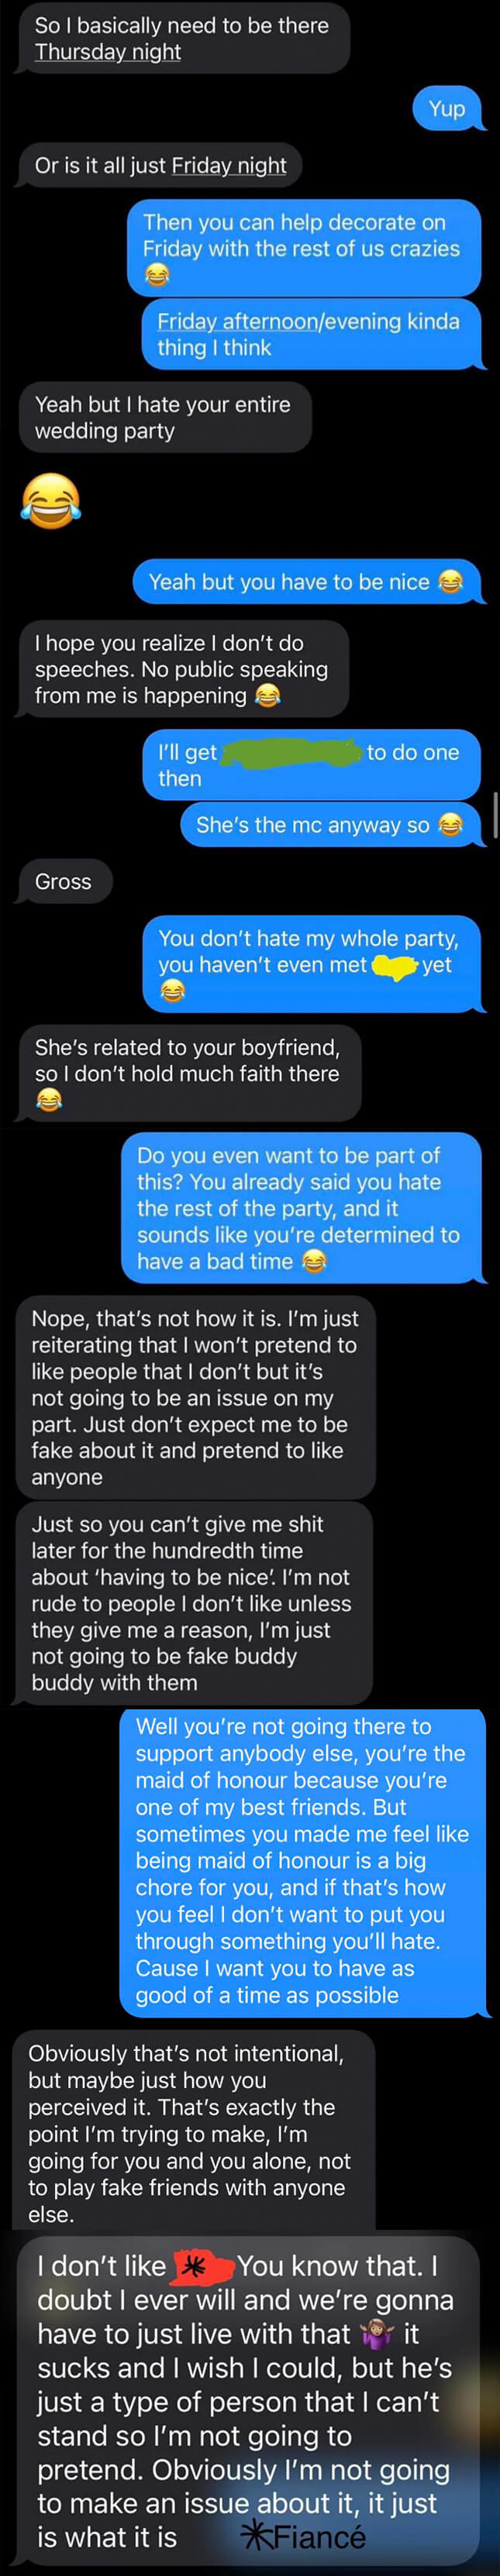 maid of honor talking shit about the bridal party and then also saying she doesn&#x27;t like the fiance